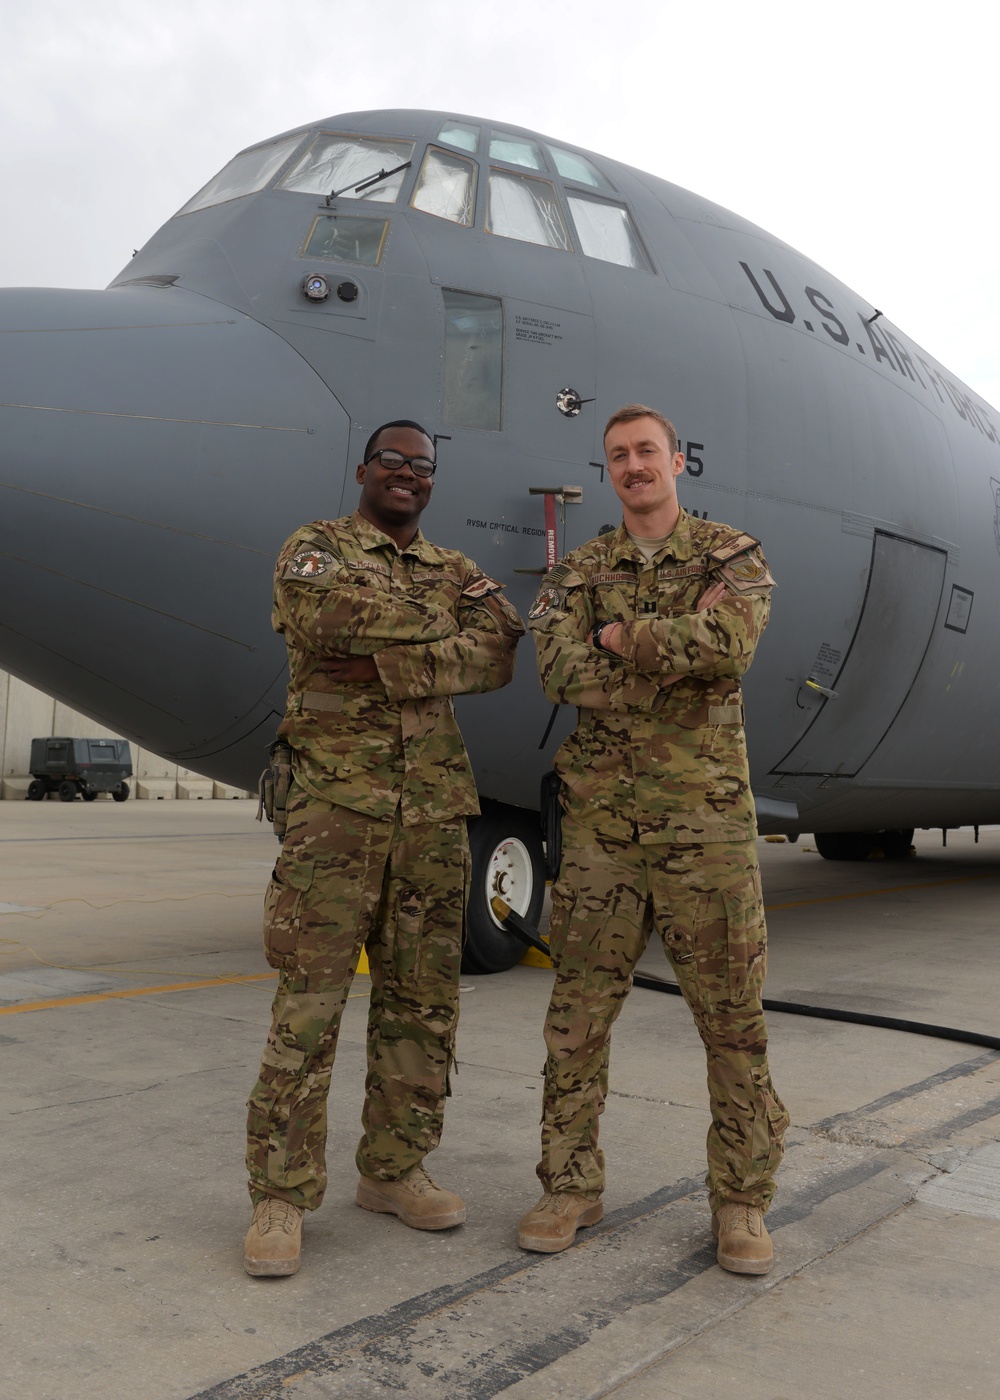 C-130J pilots taking care of the mission one flight at a time